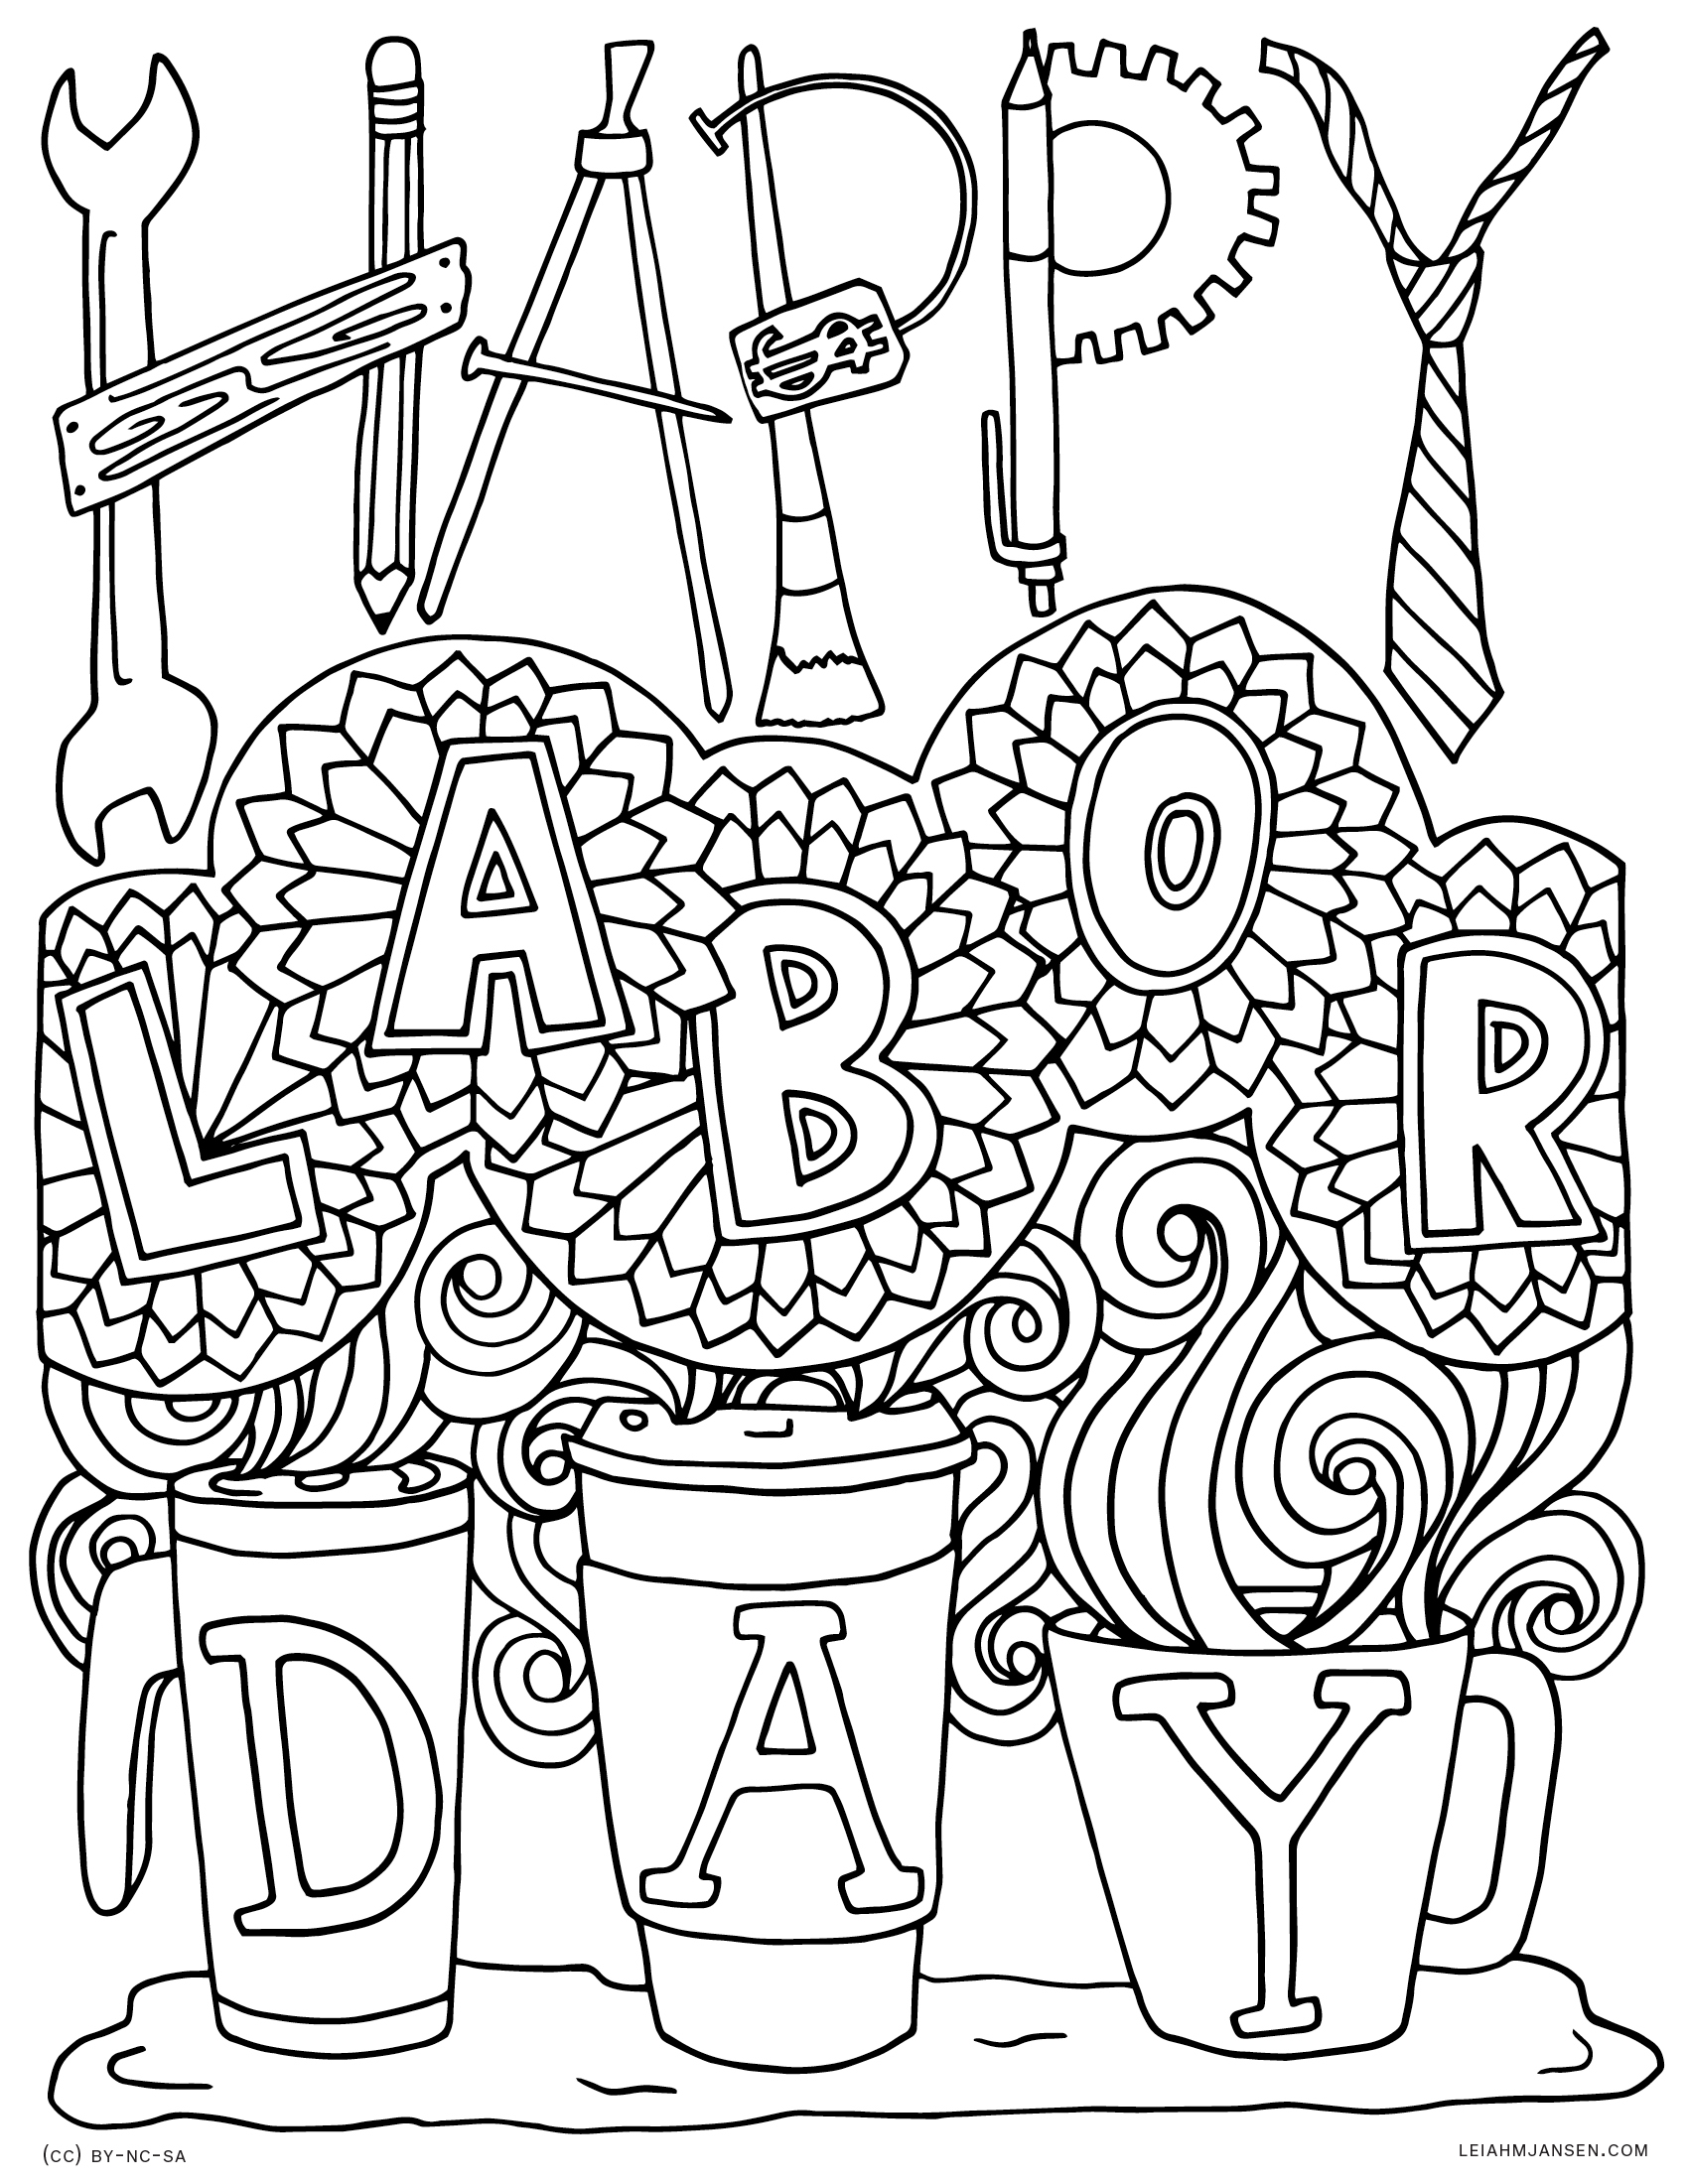 labor-day-coloring-pages-free-printable